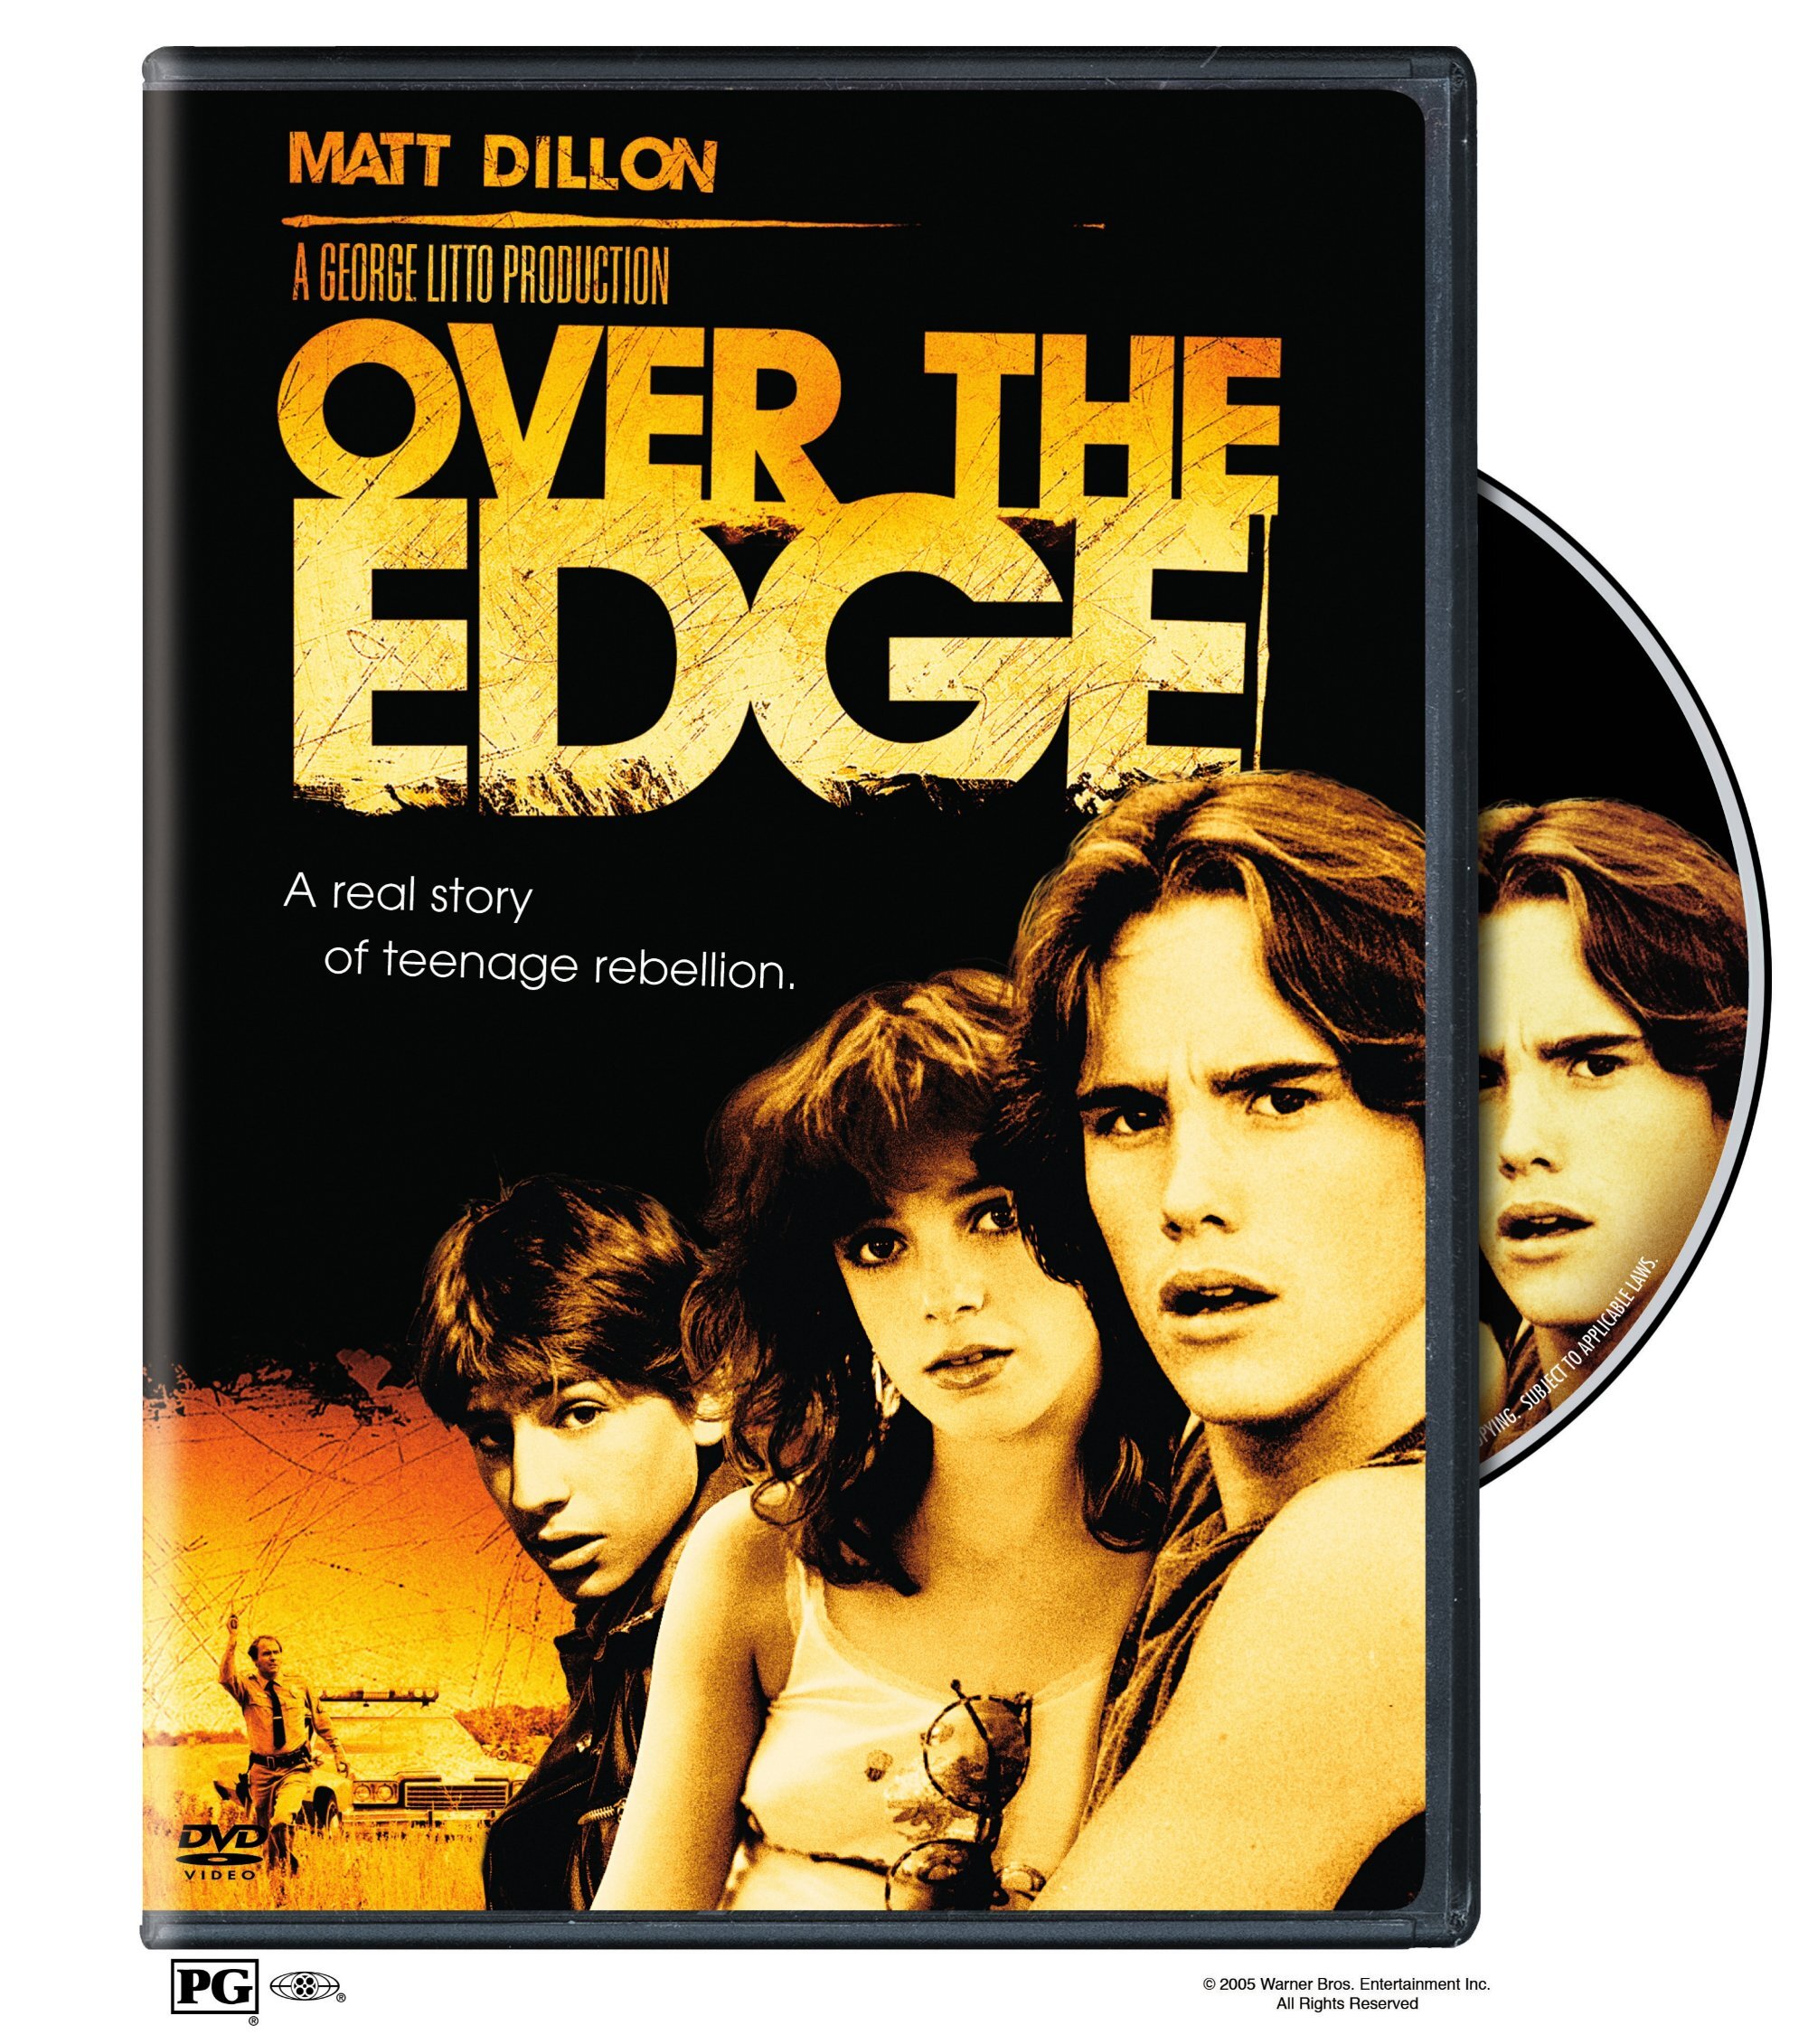 Over The Edge (DVD Widescreen) - DVD [ 1979 ]  - Drama Movies On DVD - Movies On GRUV